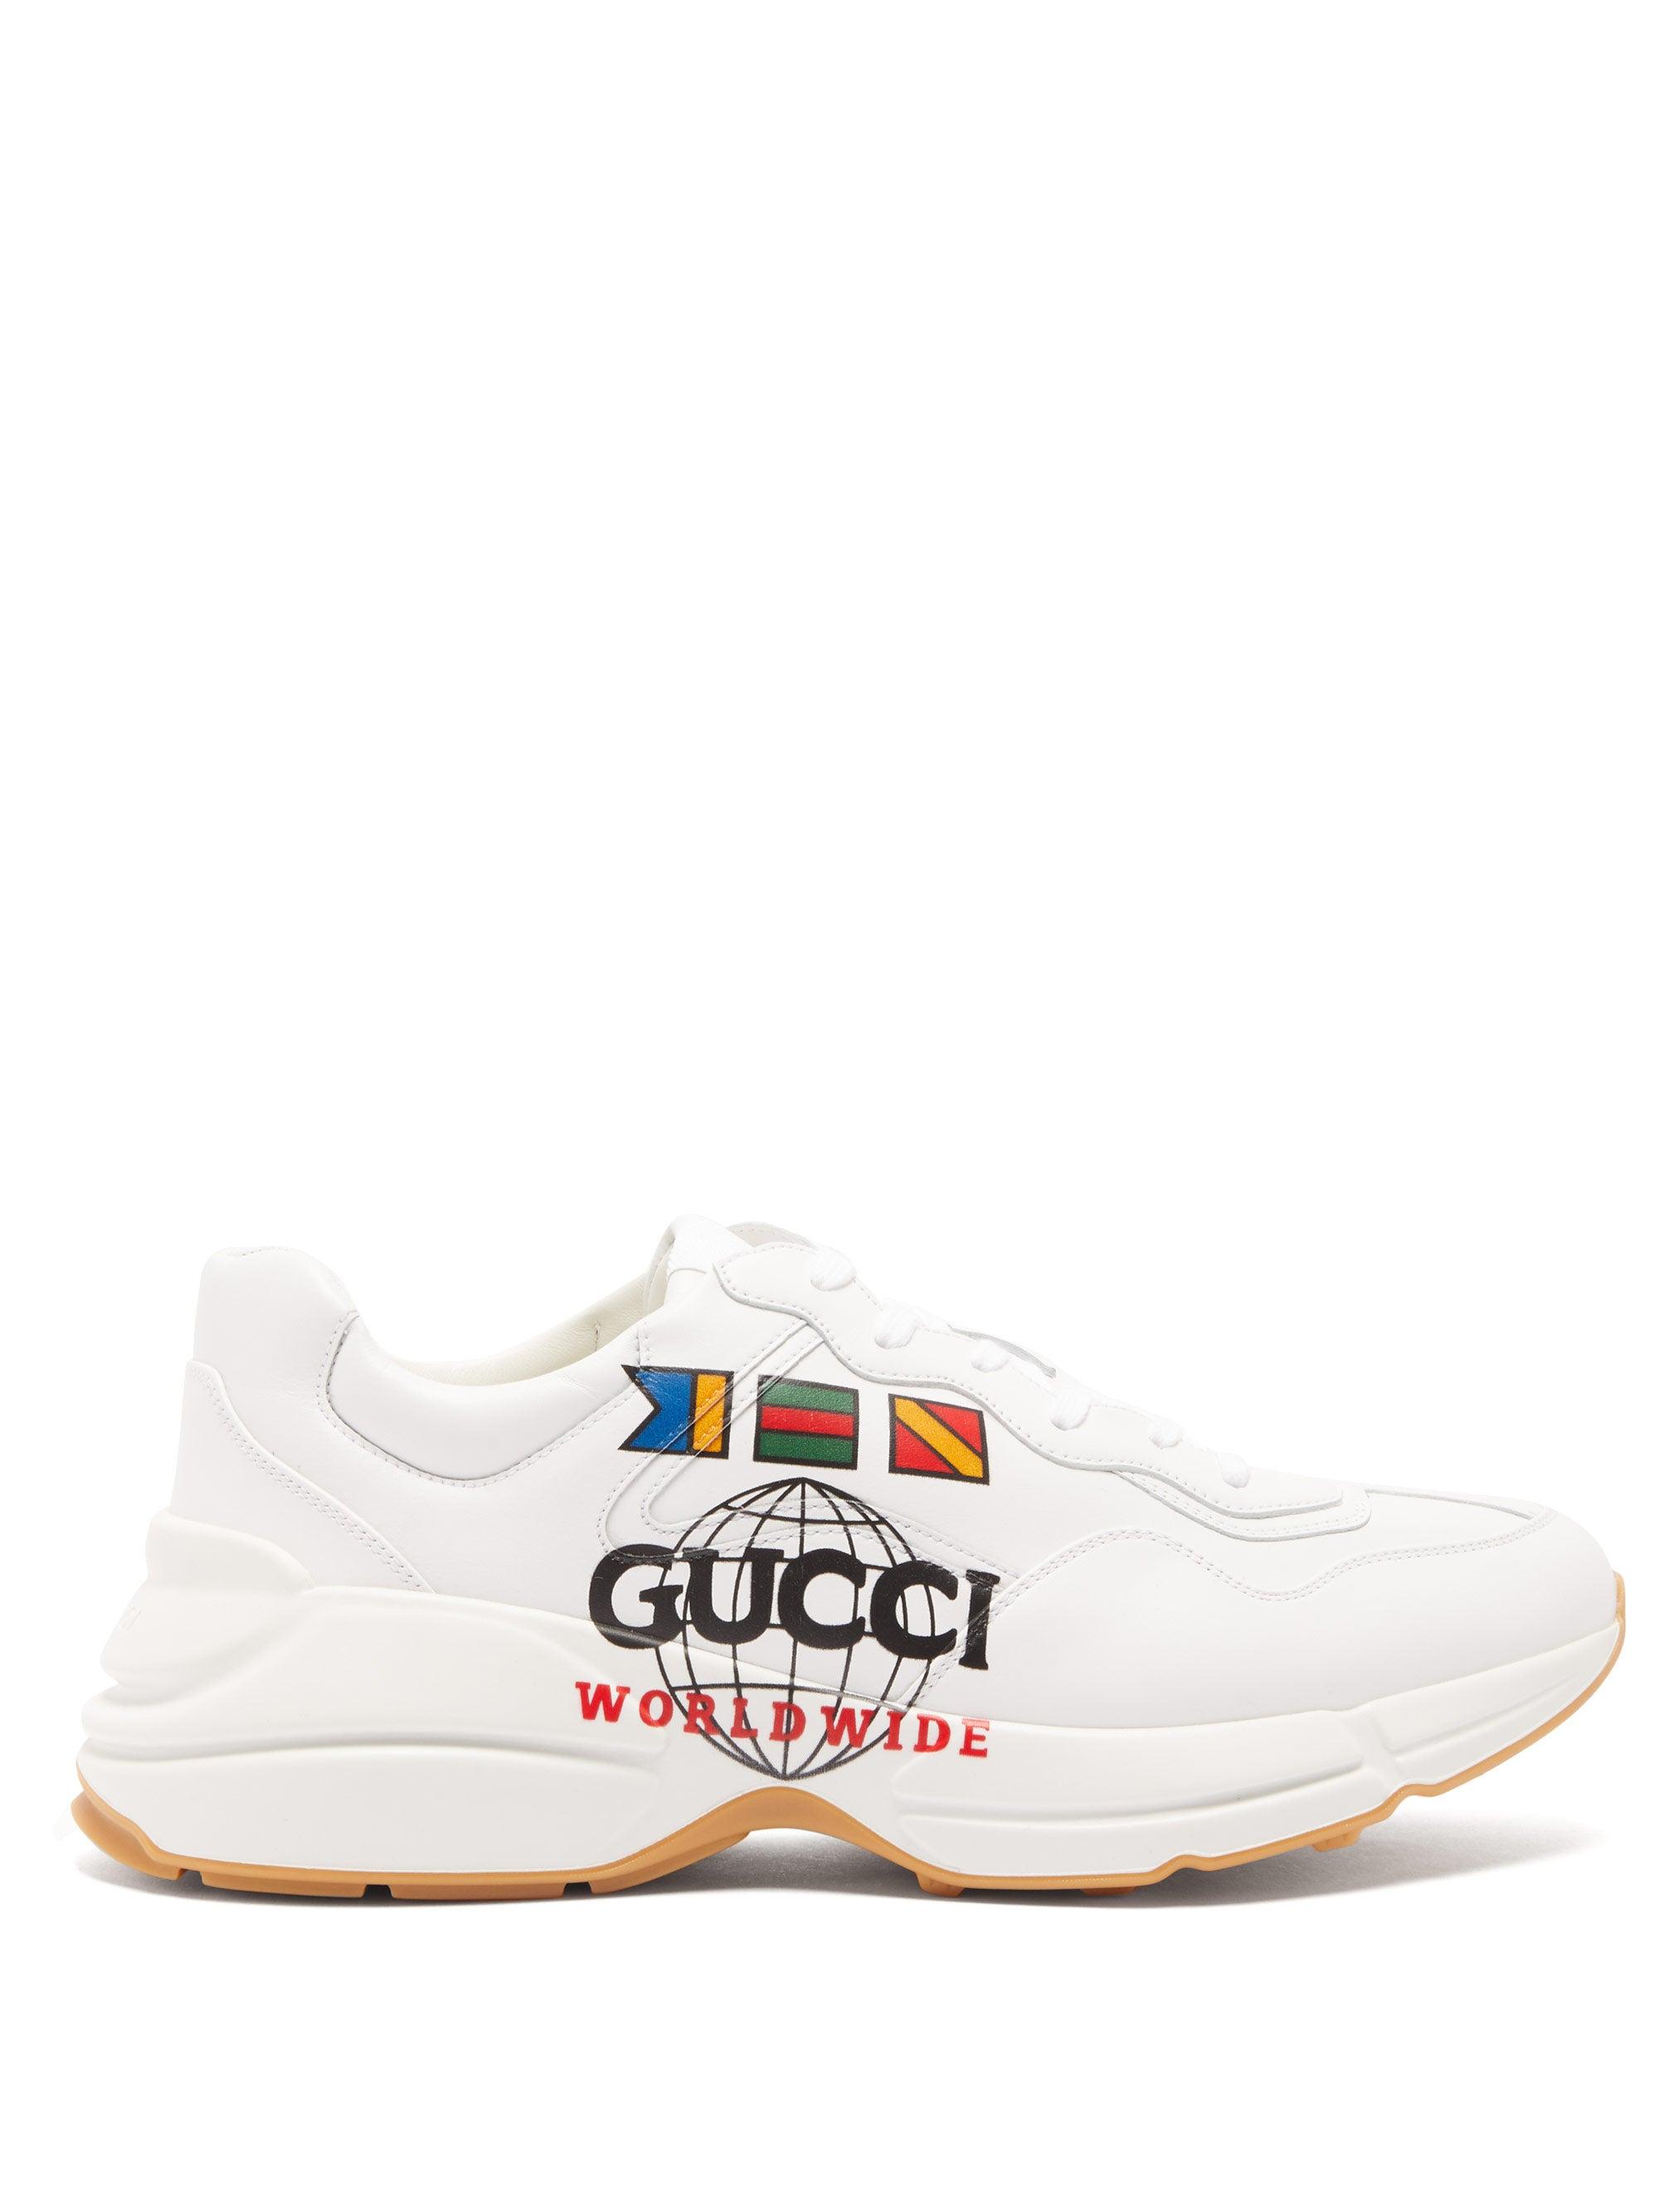 Gucci Rhyton Yankees White Leather Sneakers, Size 14 – Cashinmybag